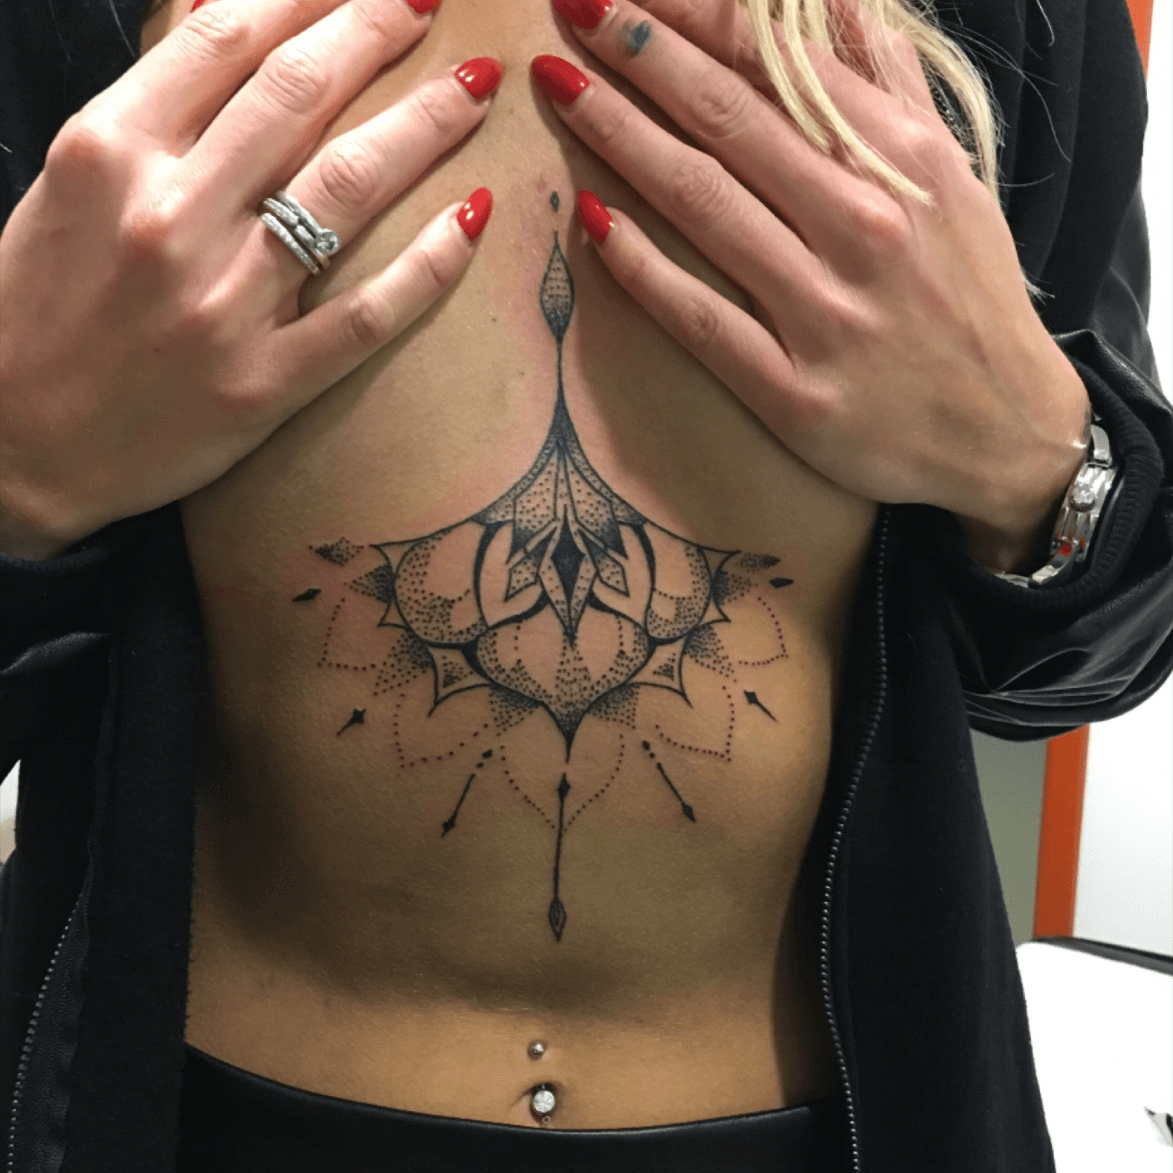 Tattoo uploaded by Veronica • This would be nice #underboobtattoo • Tattoodo